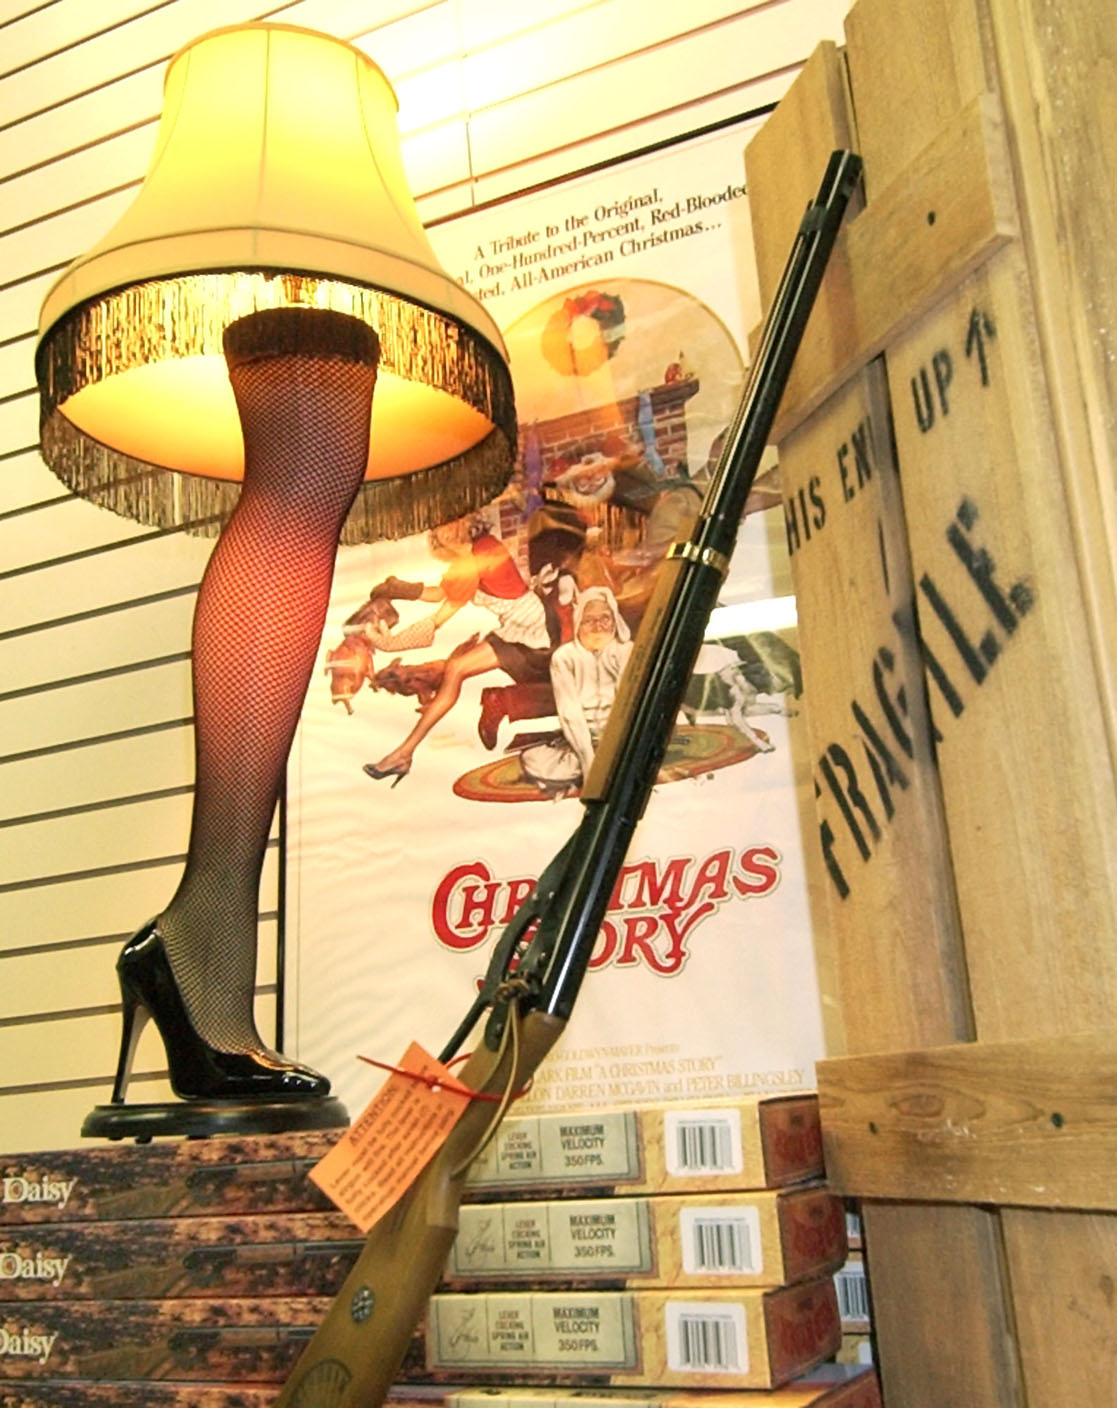 You'll shoot eye out': Ralphie's Red Ryder gun remembered in Rogers